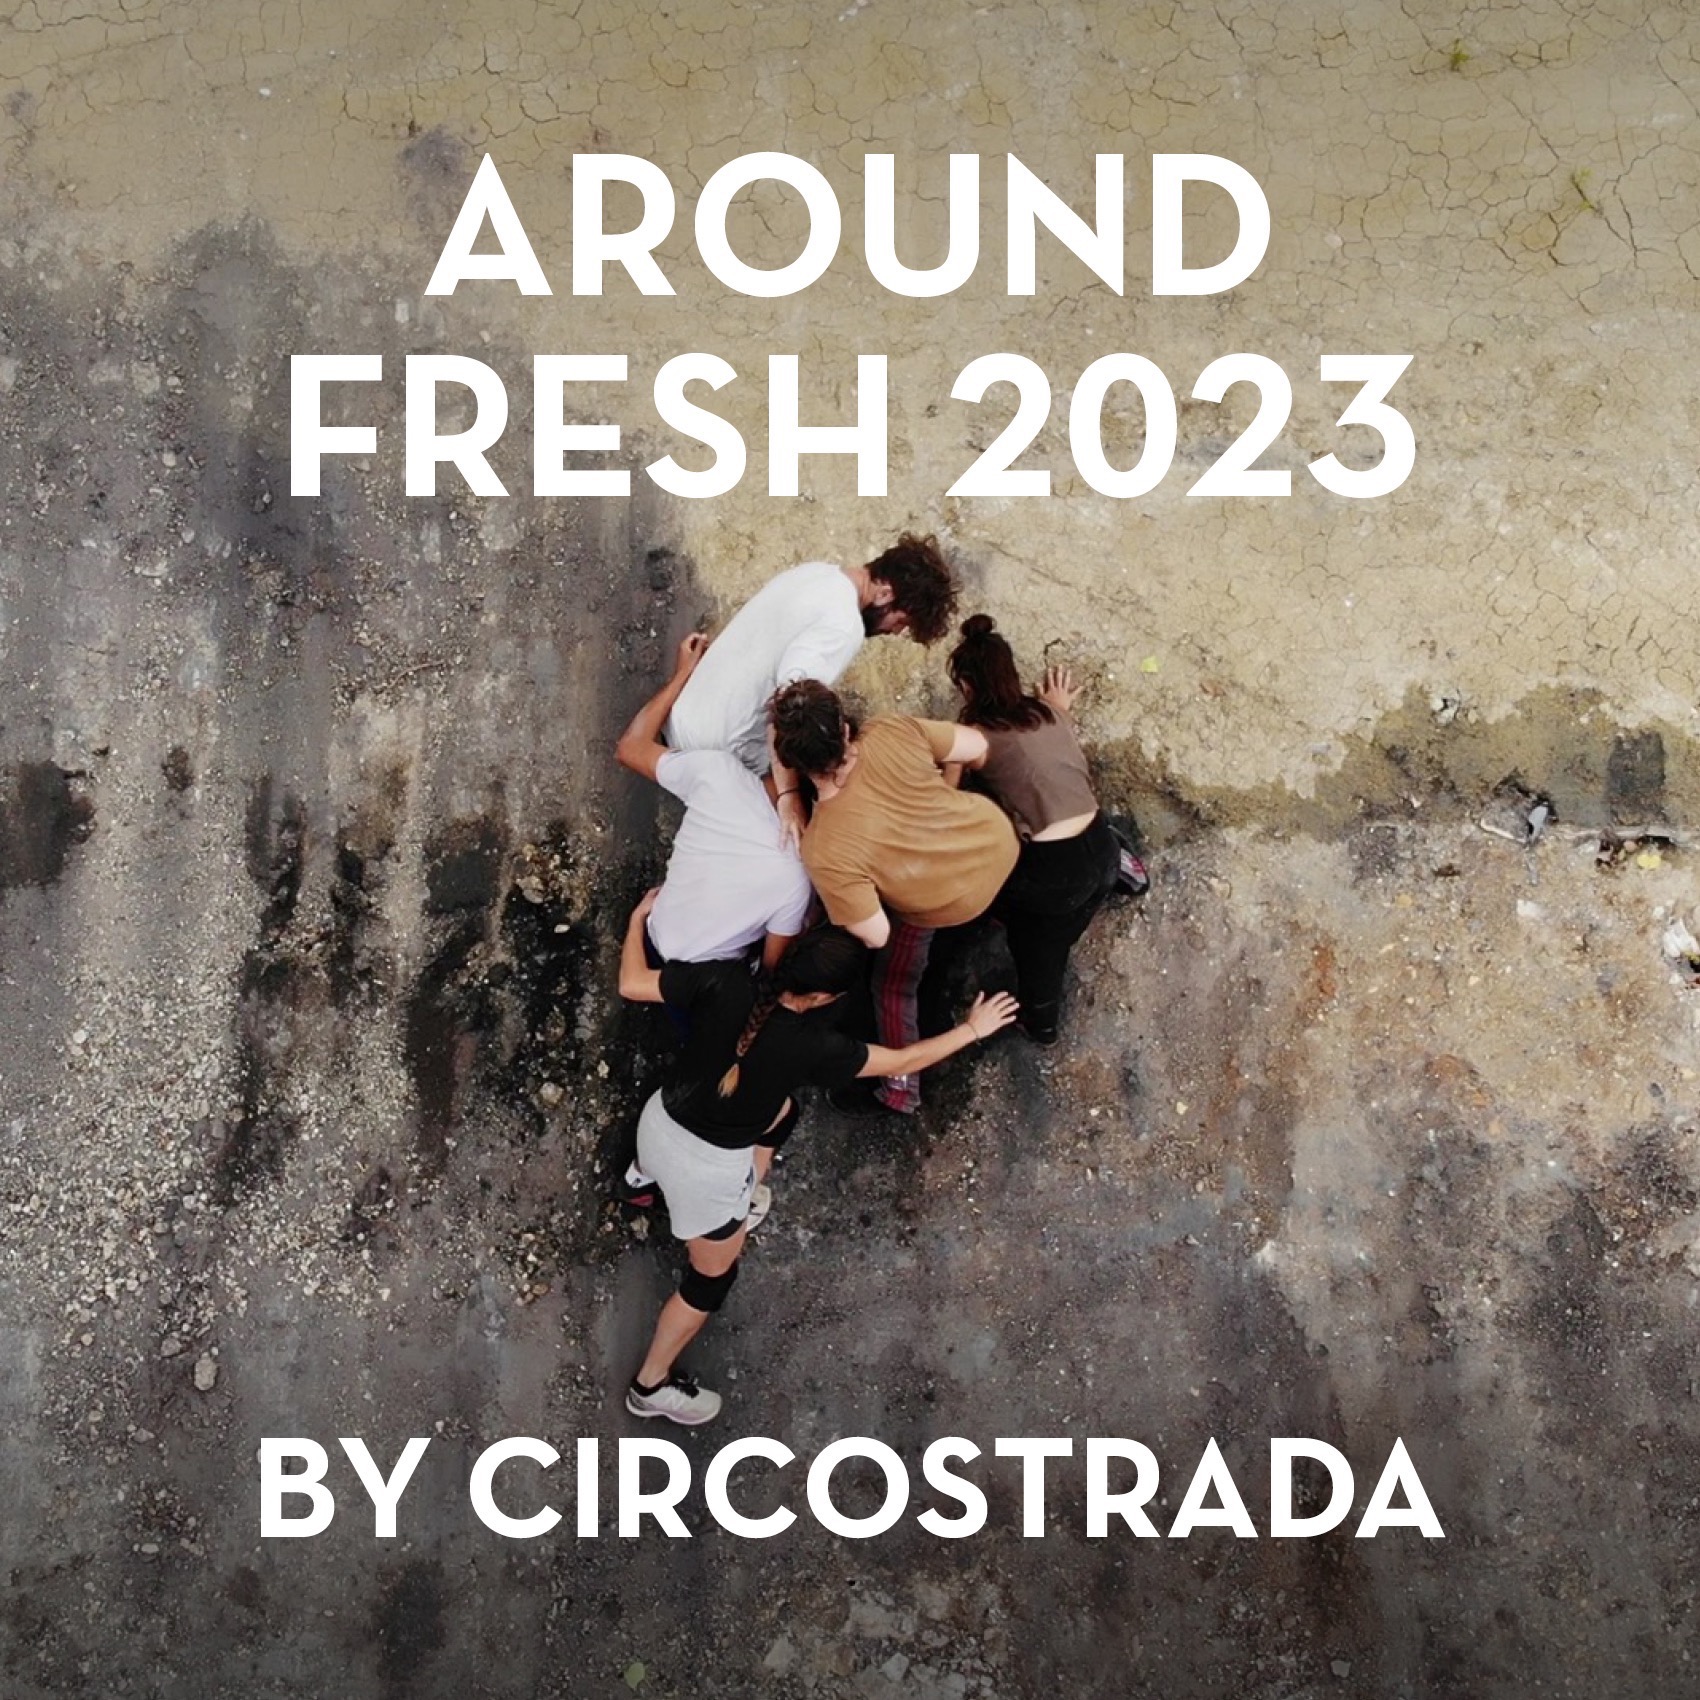 ep5 Behind the scenes: Stéphane from Circostrada on FRESH 2023